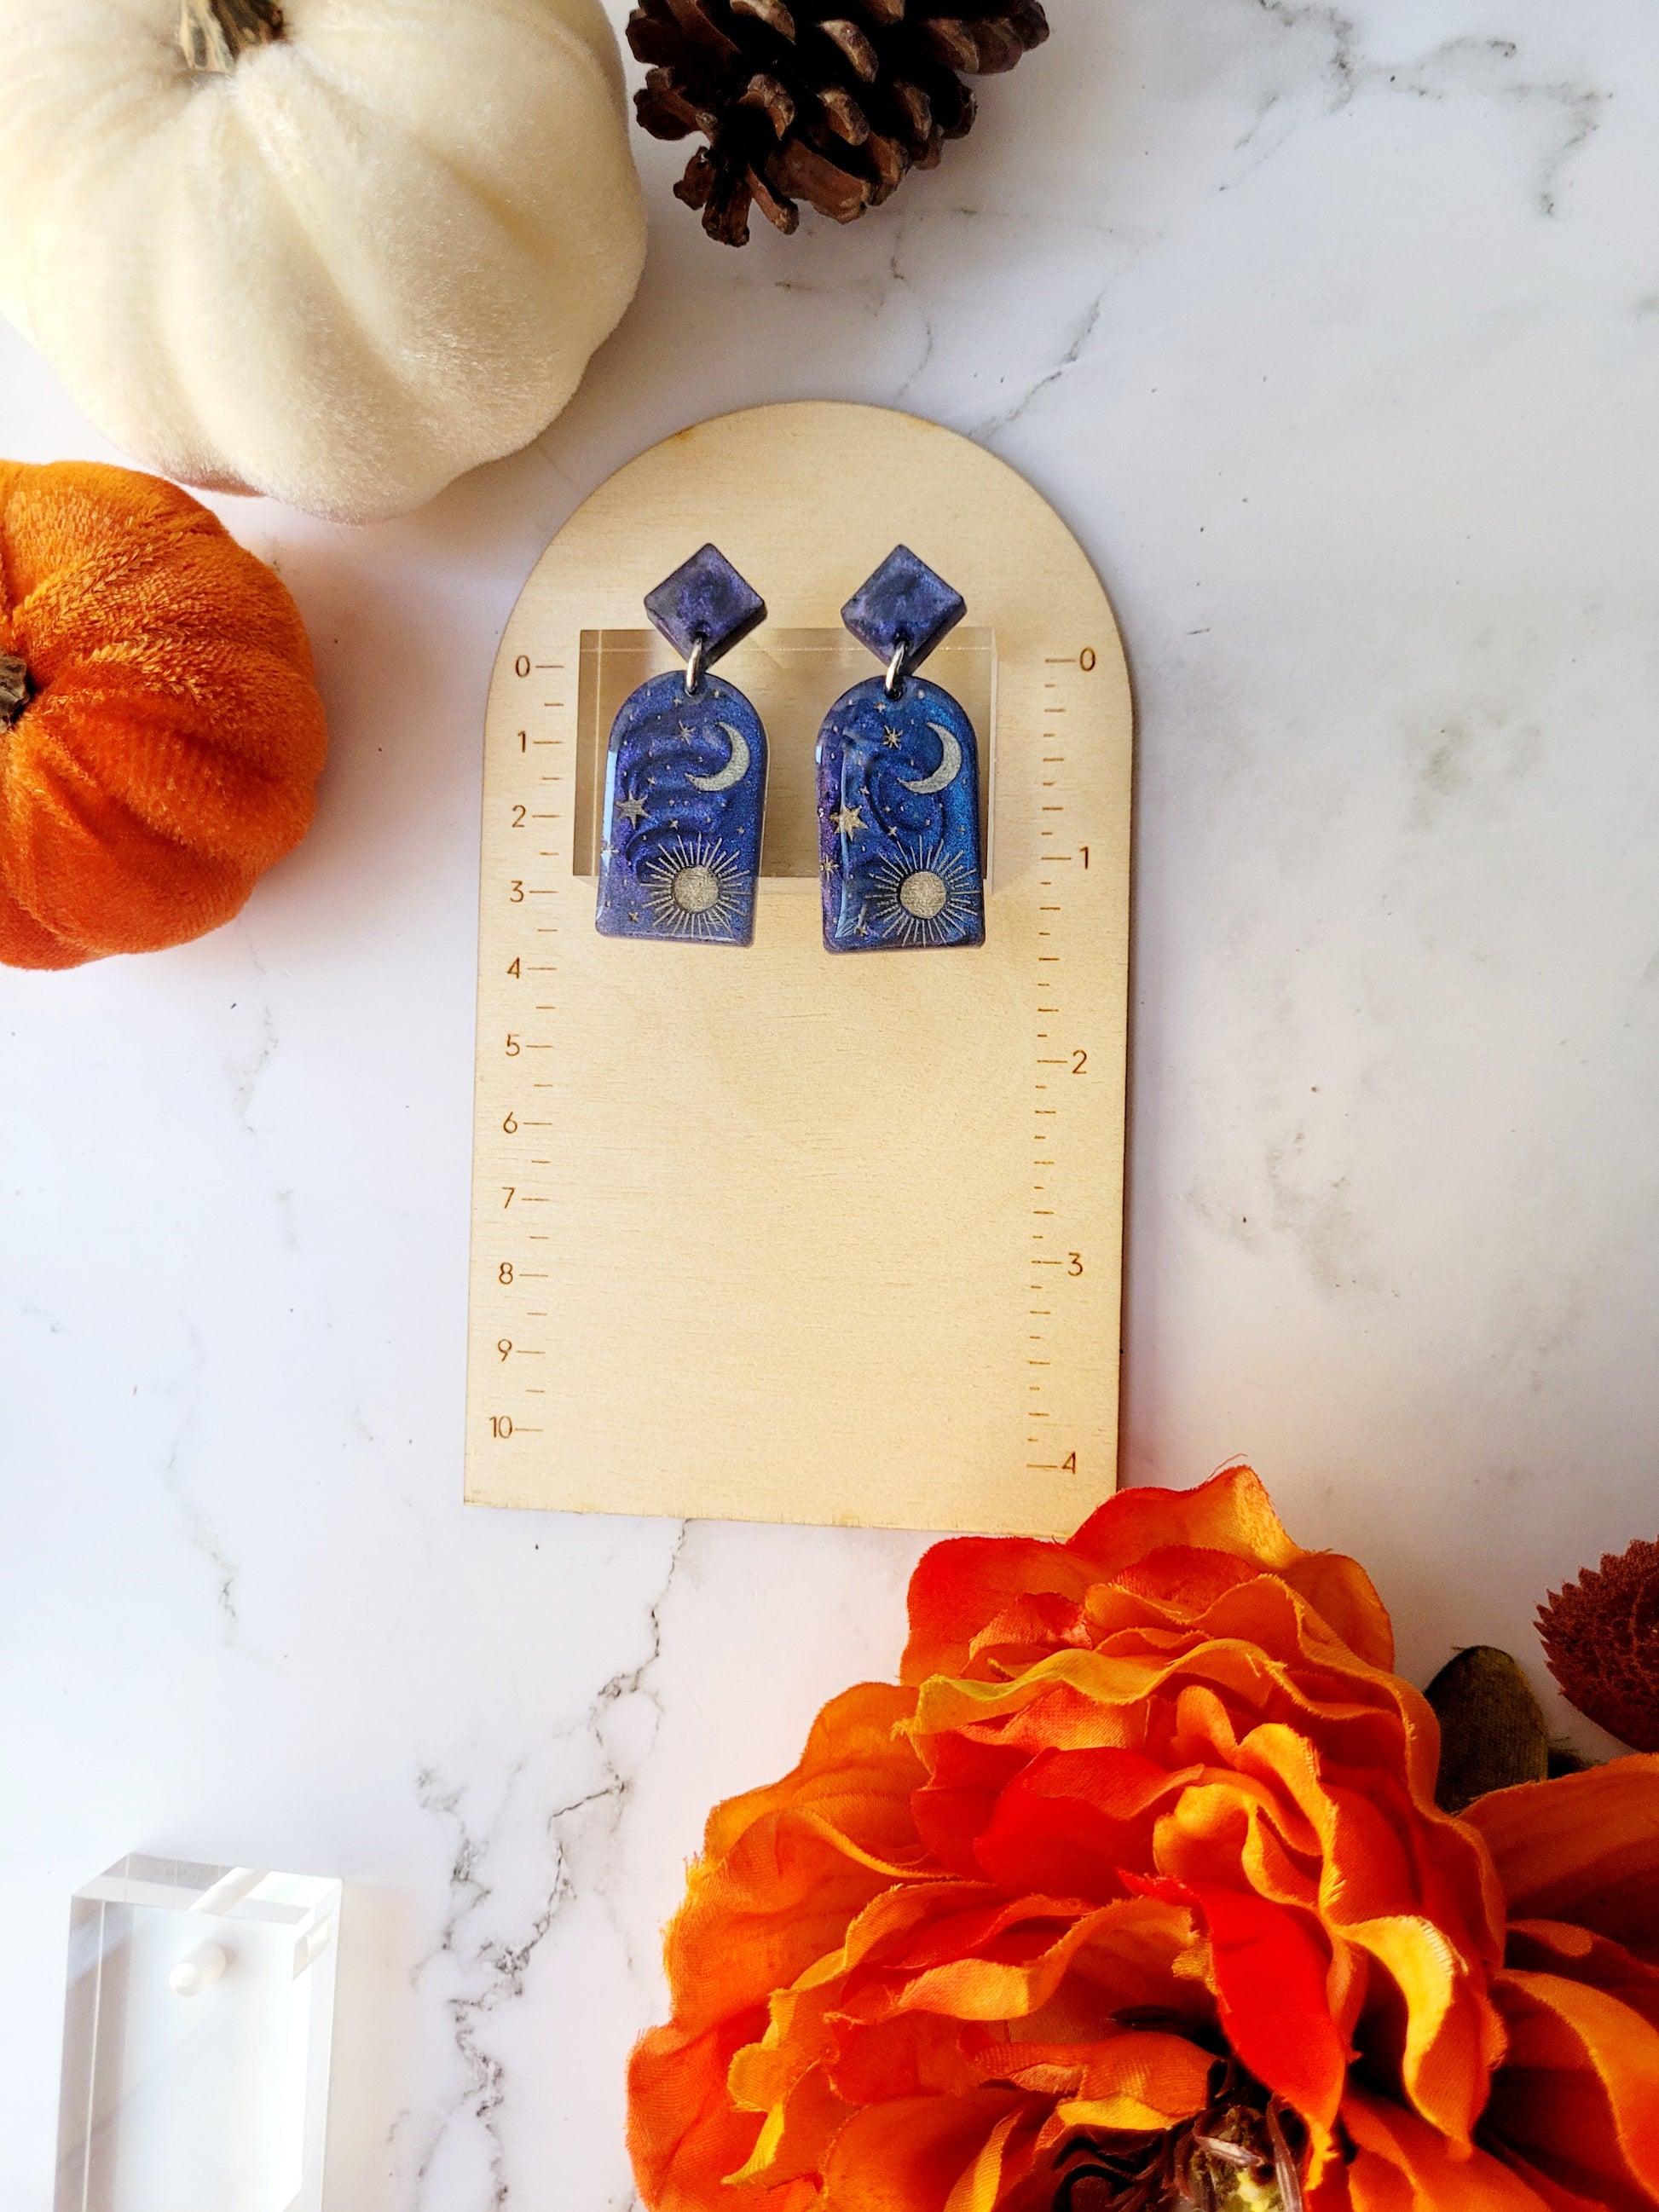 blue arch earrings with painted celestial details on a ruler background.